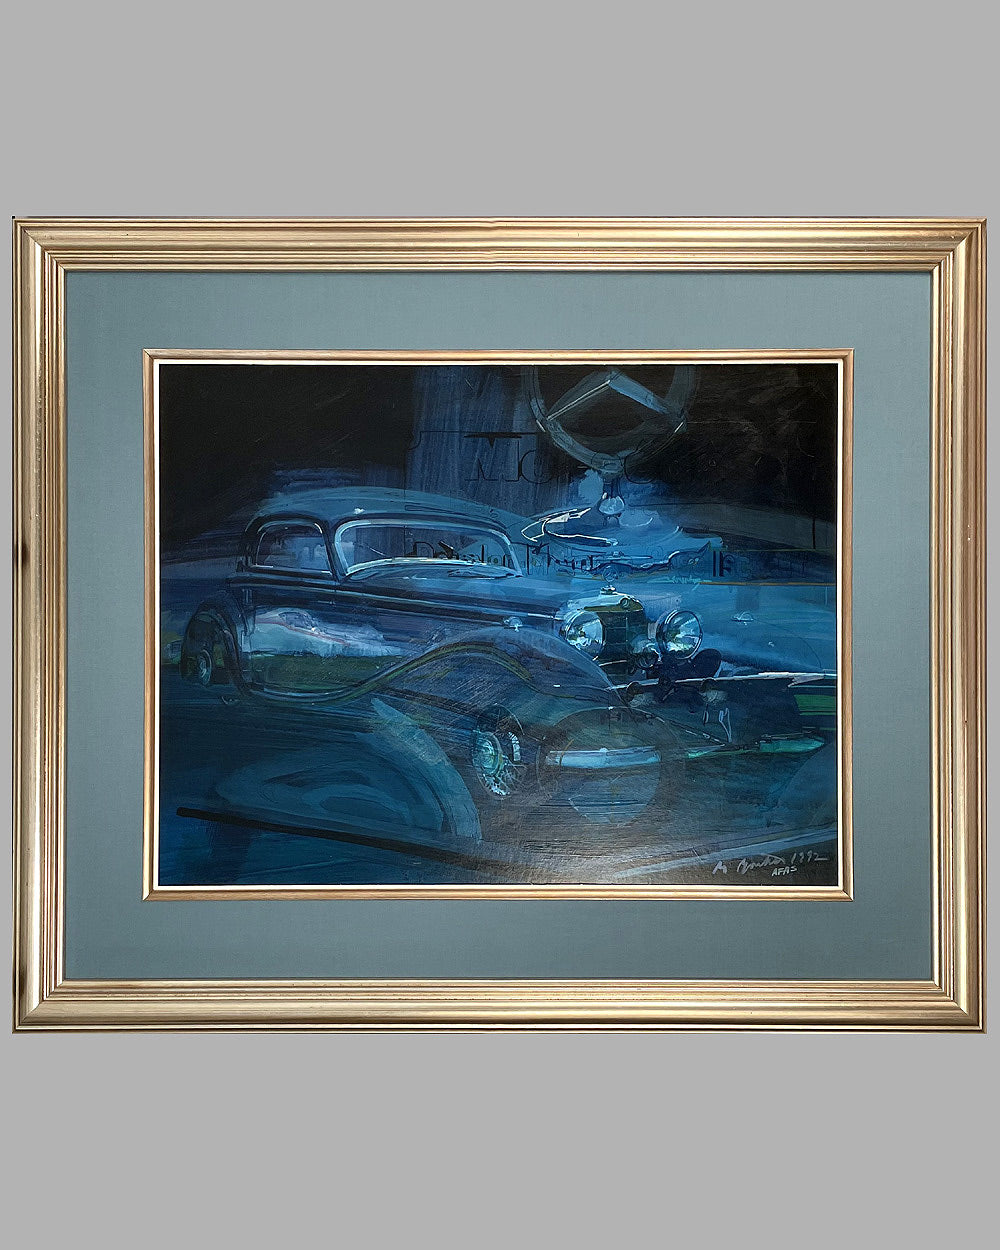 Mercedes-Benz 540K painting by George Bartell, 1992